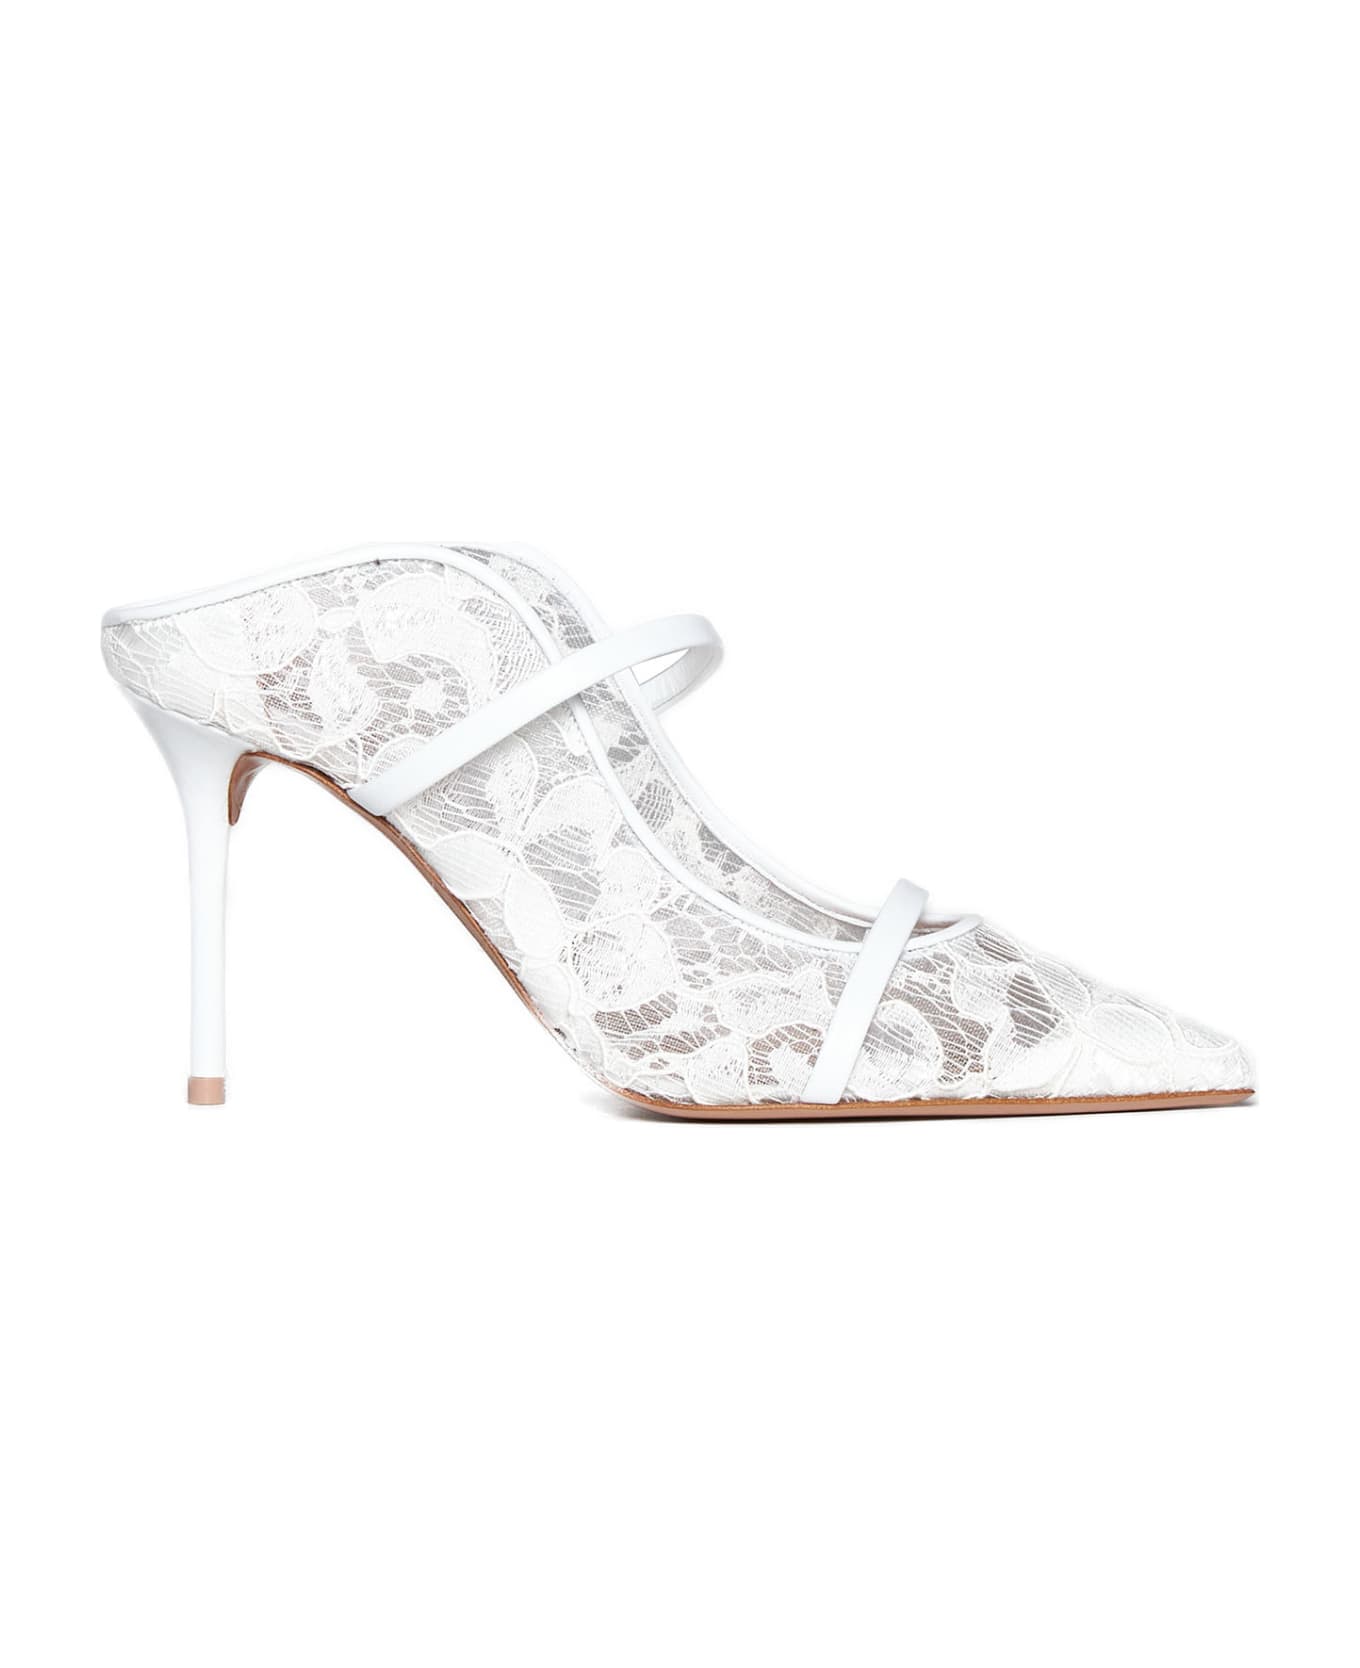 Malone Souliers Sandals - Whitewhite